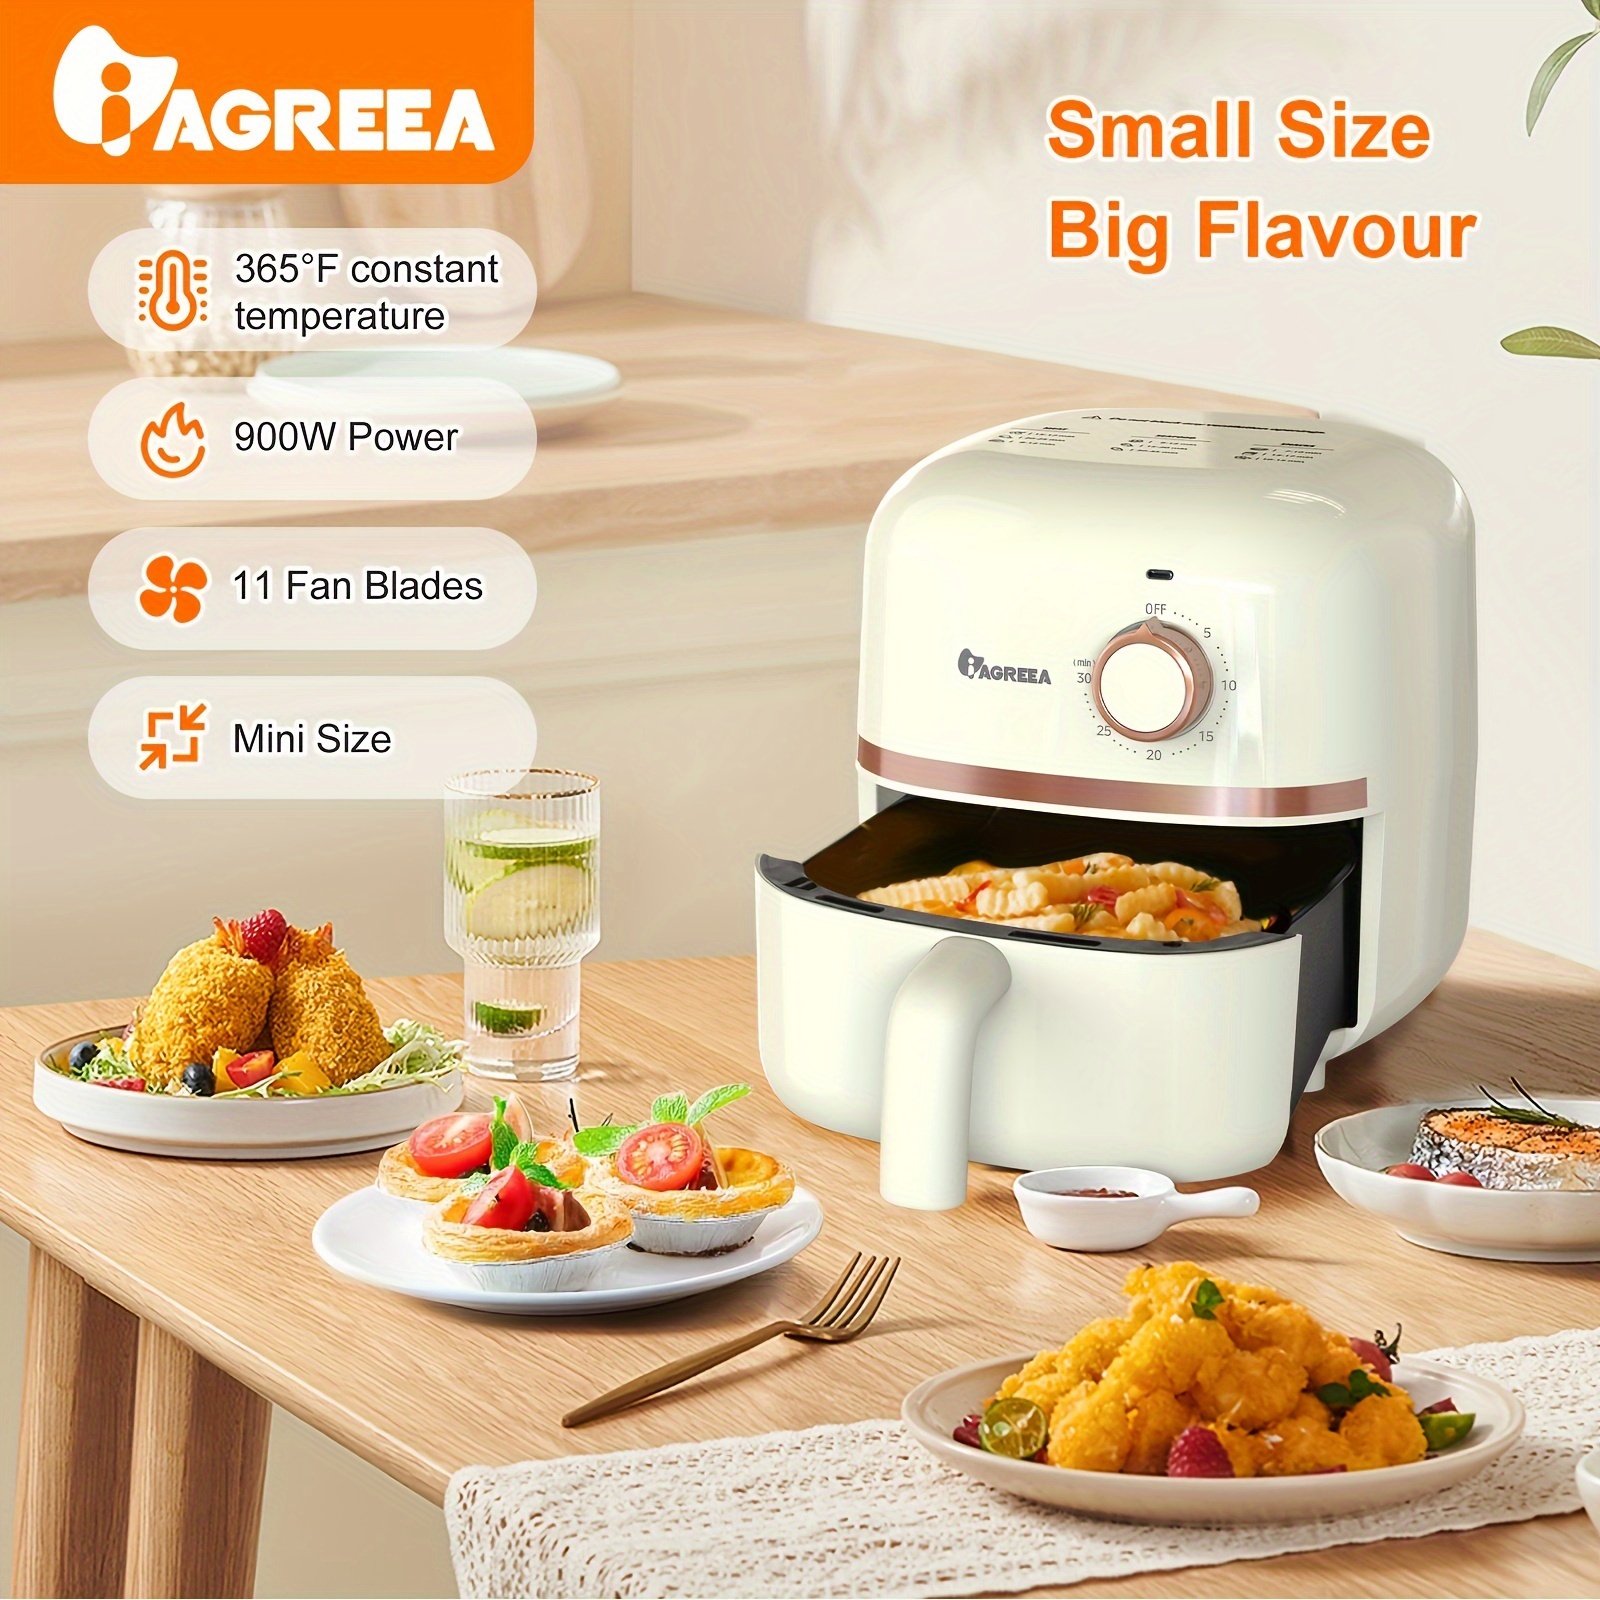 Air Fryer Electric Oven Visual Air Fryer Smokeless Oil Free Fry Visible  Glass